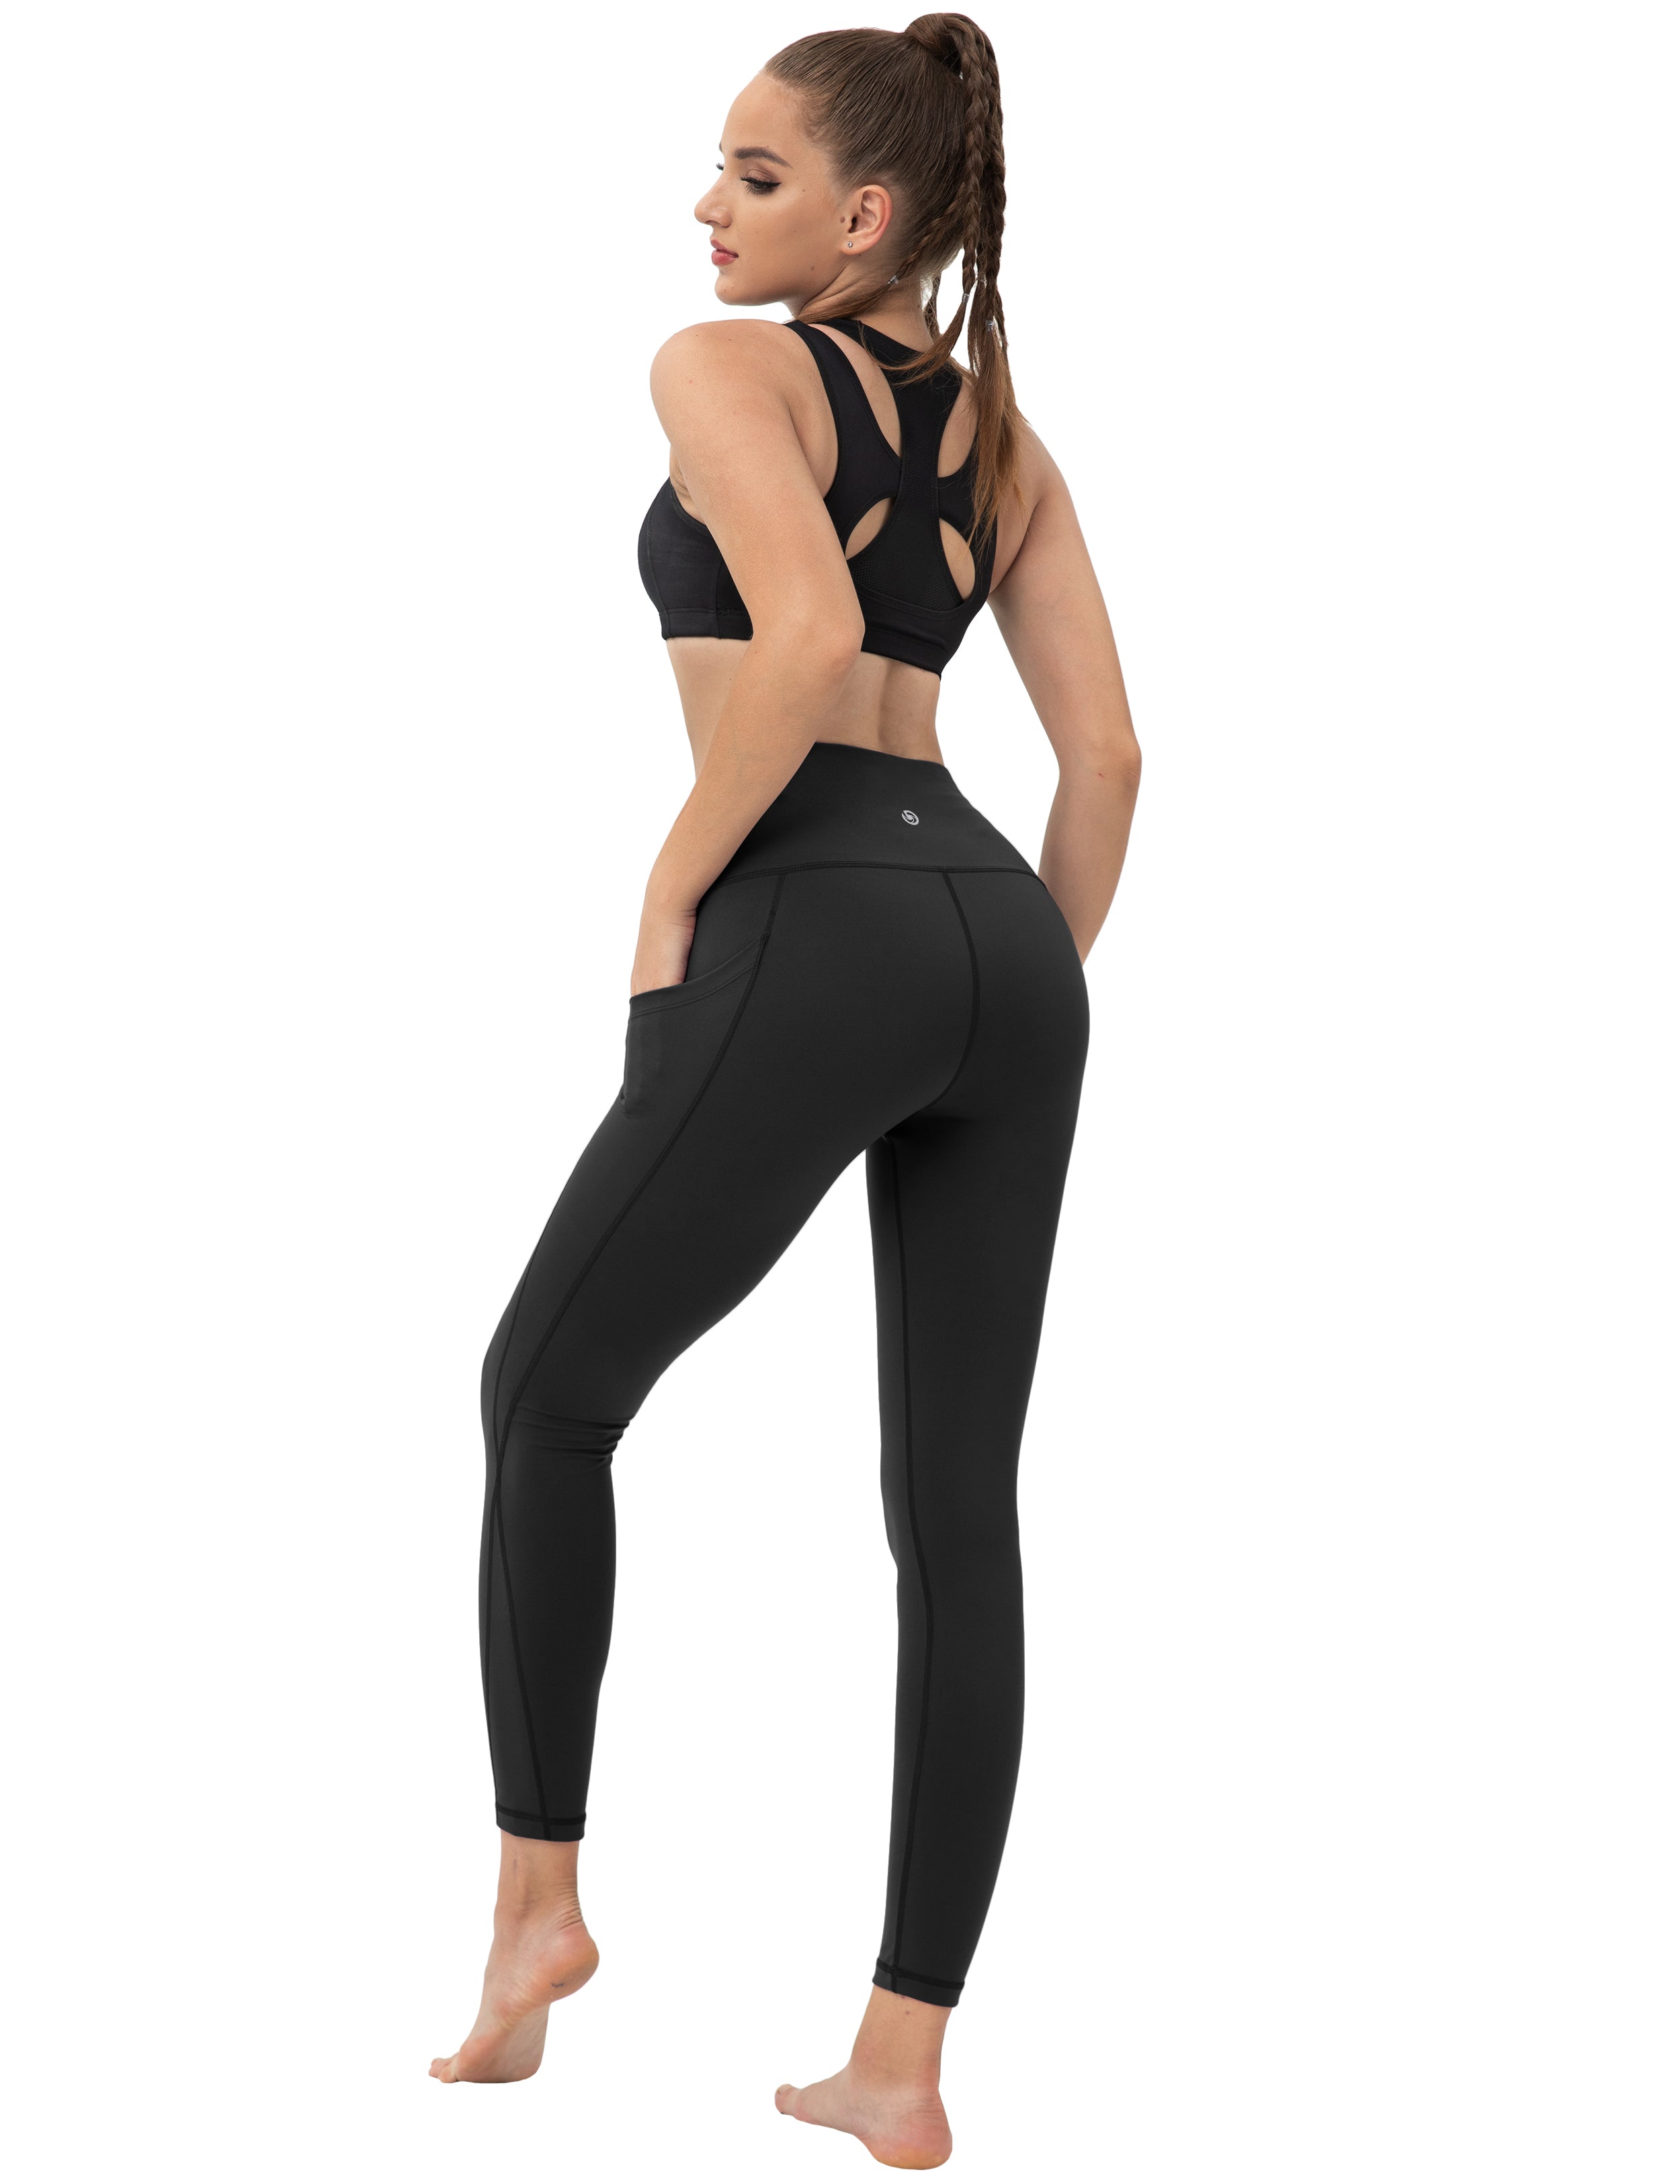 High Waist Side Pockets Biking Pants black 75% Nylon, 25% Spandex Fabric doesn't attract lint easily 4-way stretch No see-through Moisture-wicking Tummy control Inner pocket